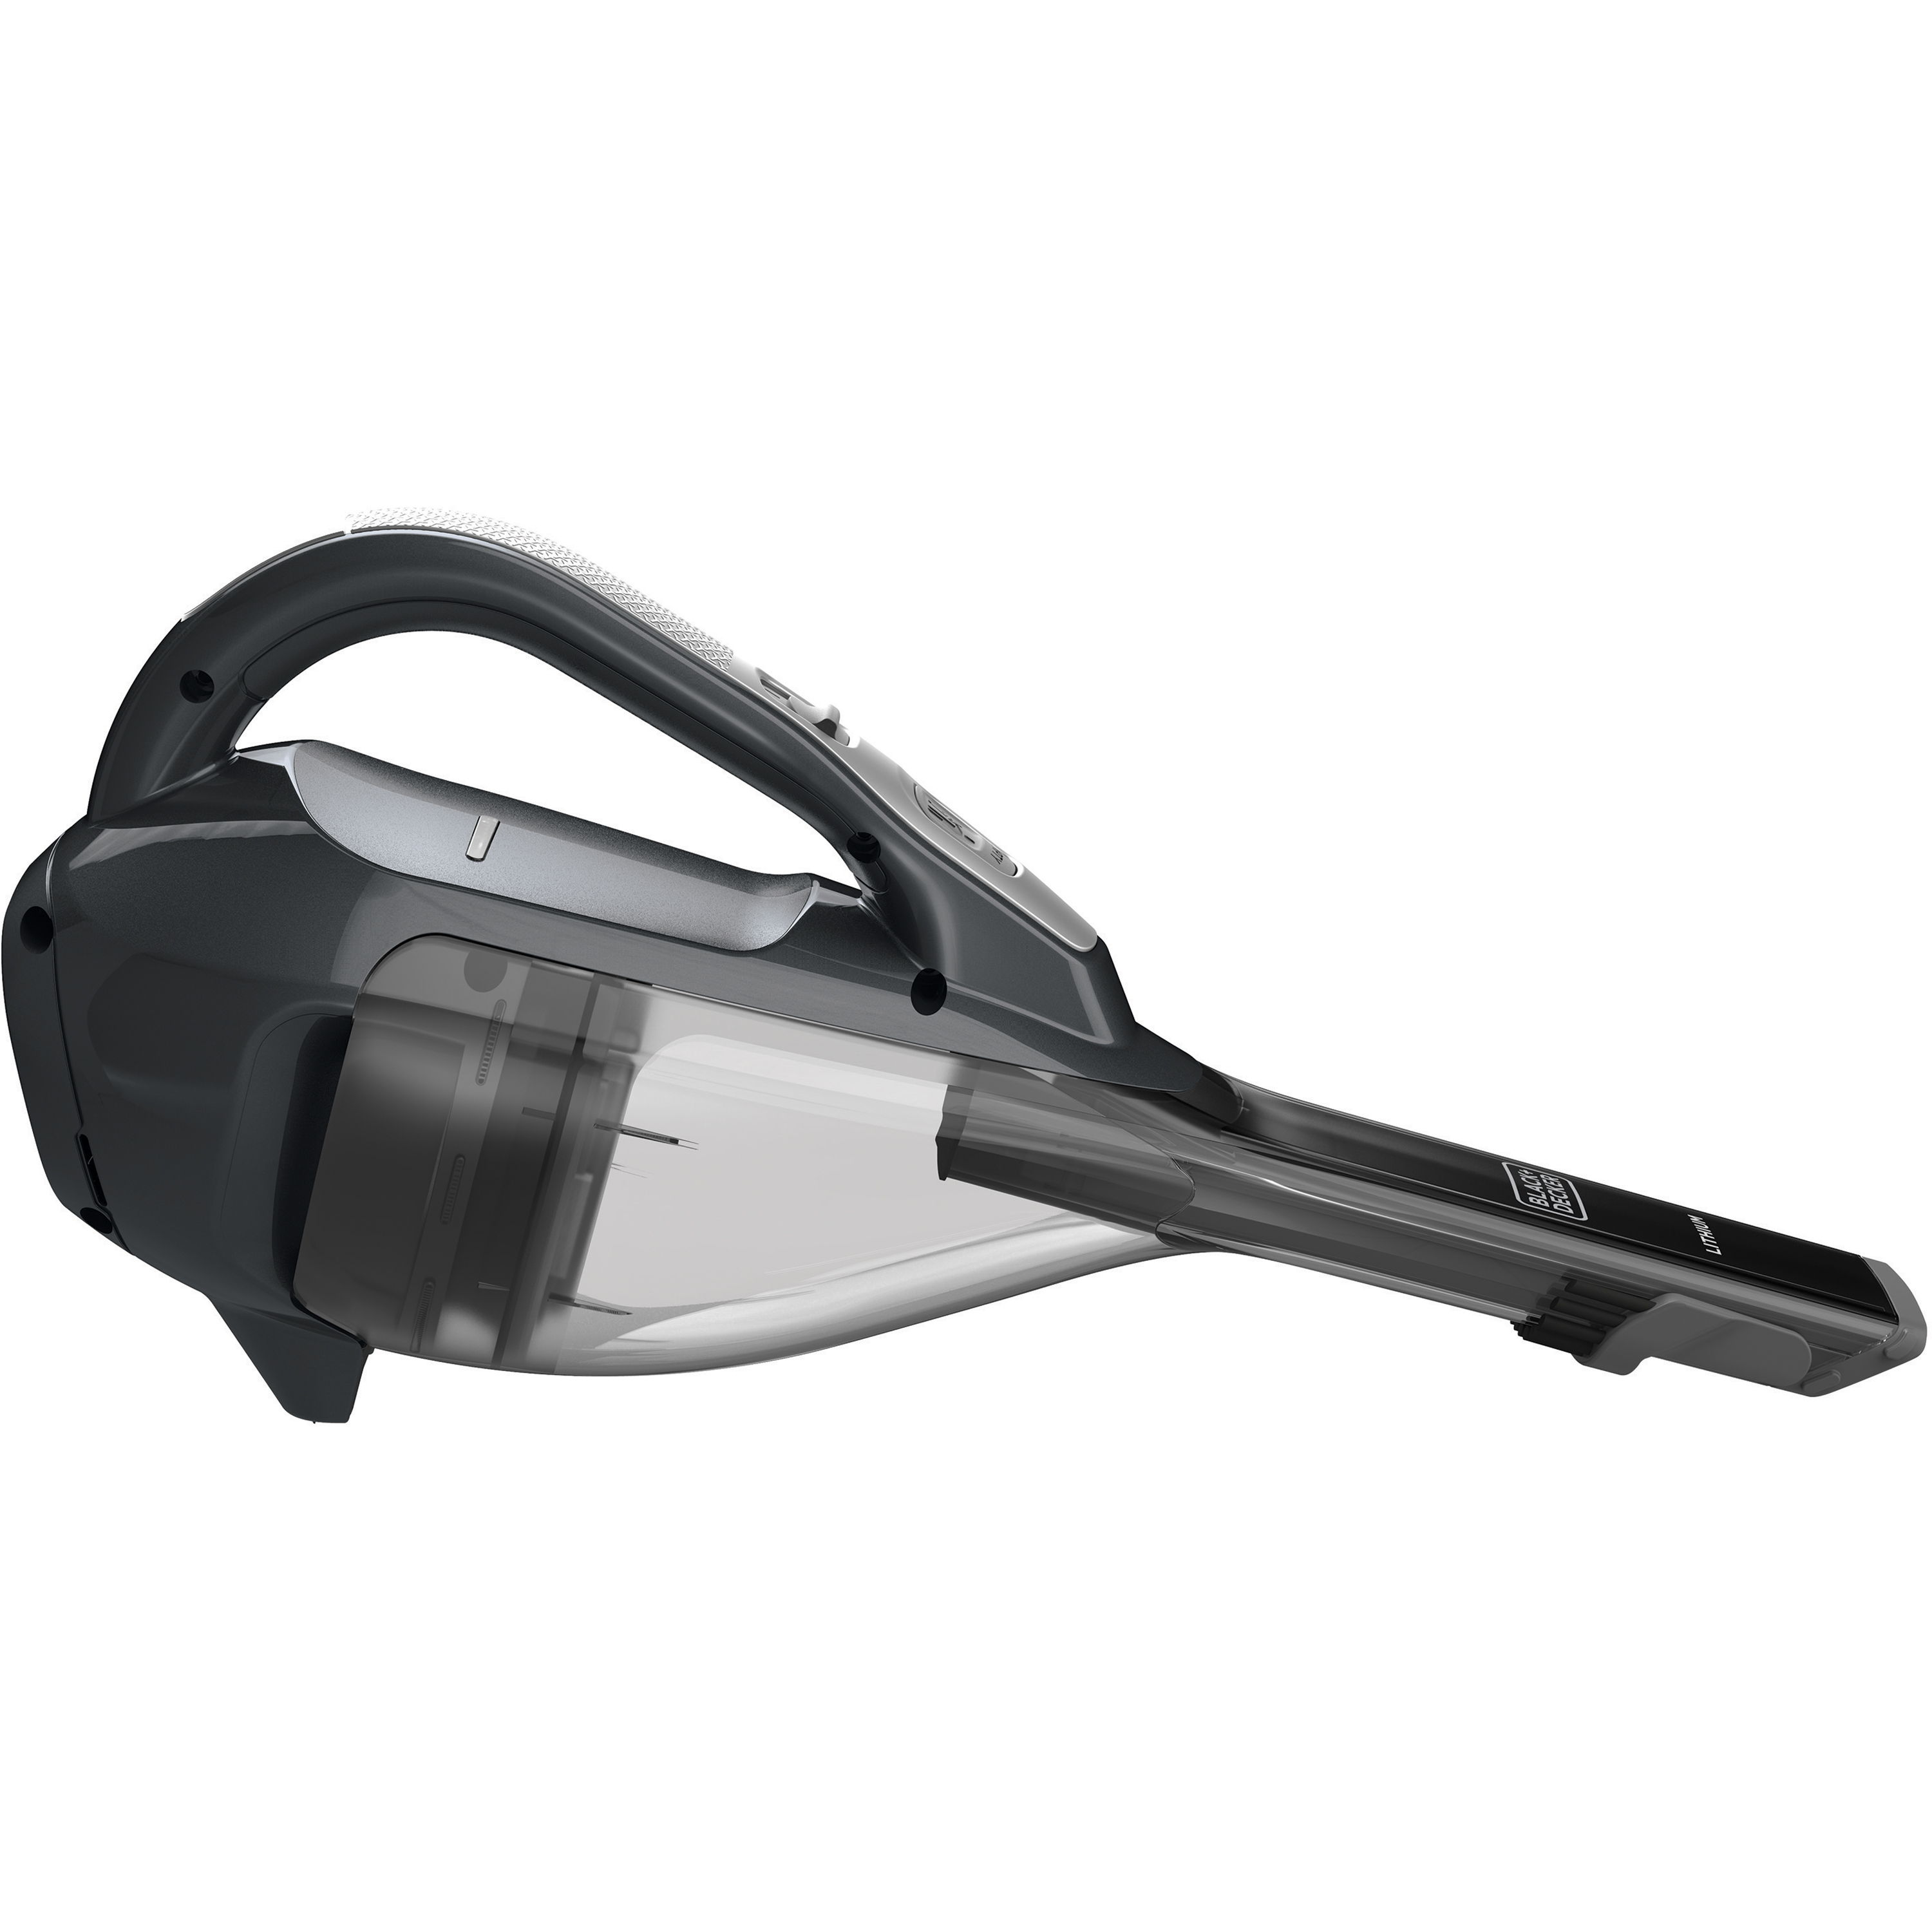 BLACK+DECKER™ Lithium Cordless Hand Vacuum with Scented Filter